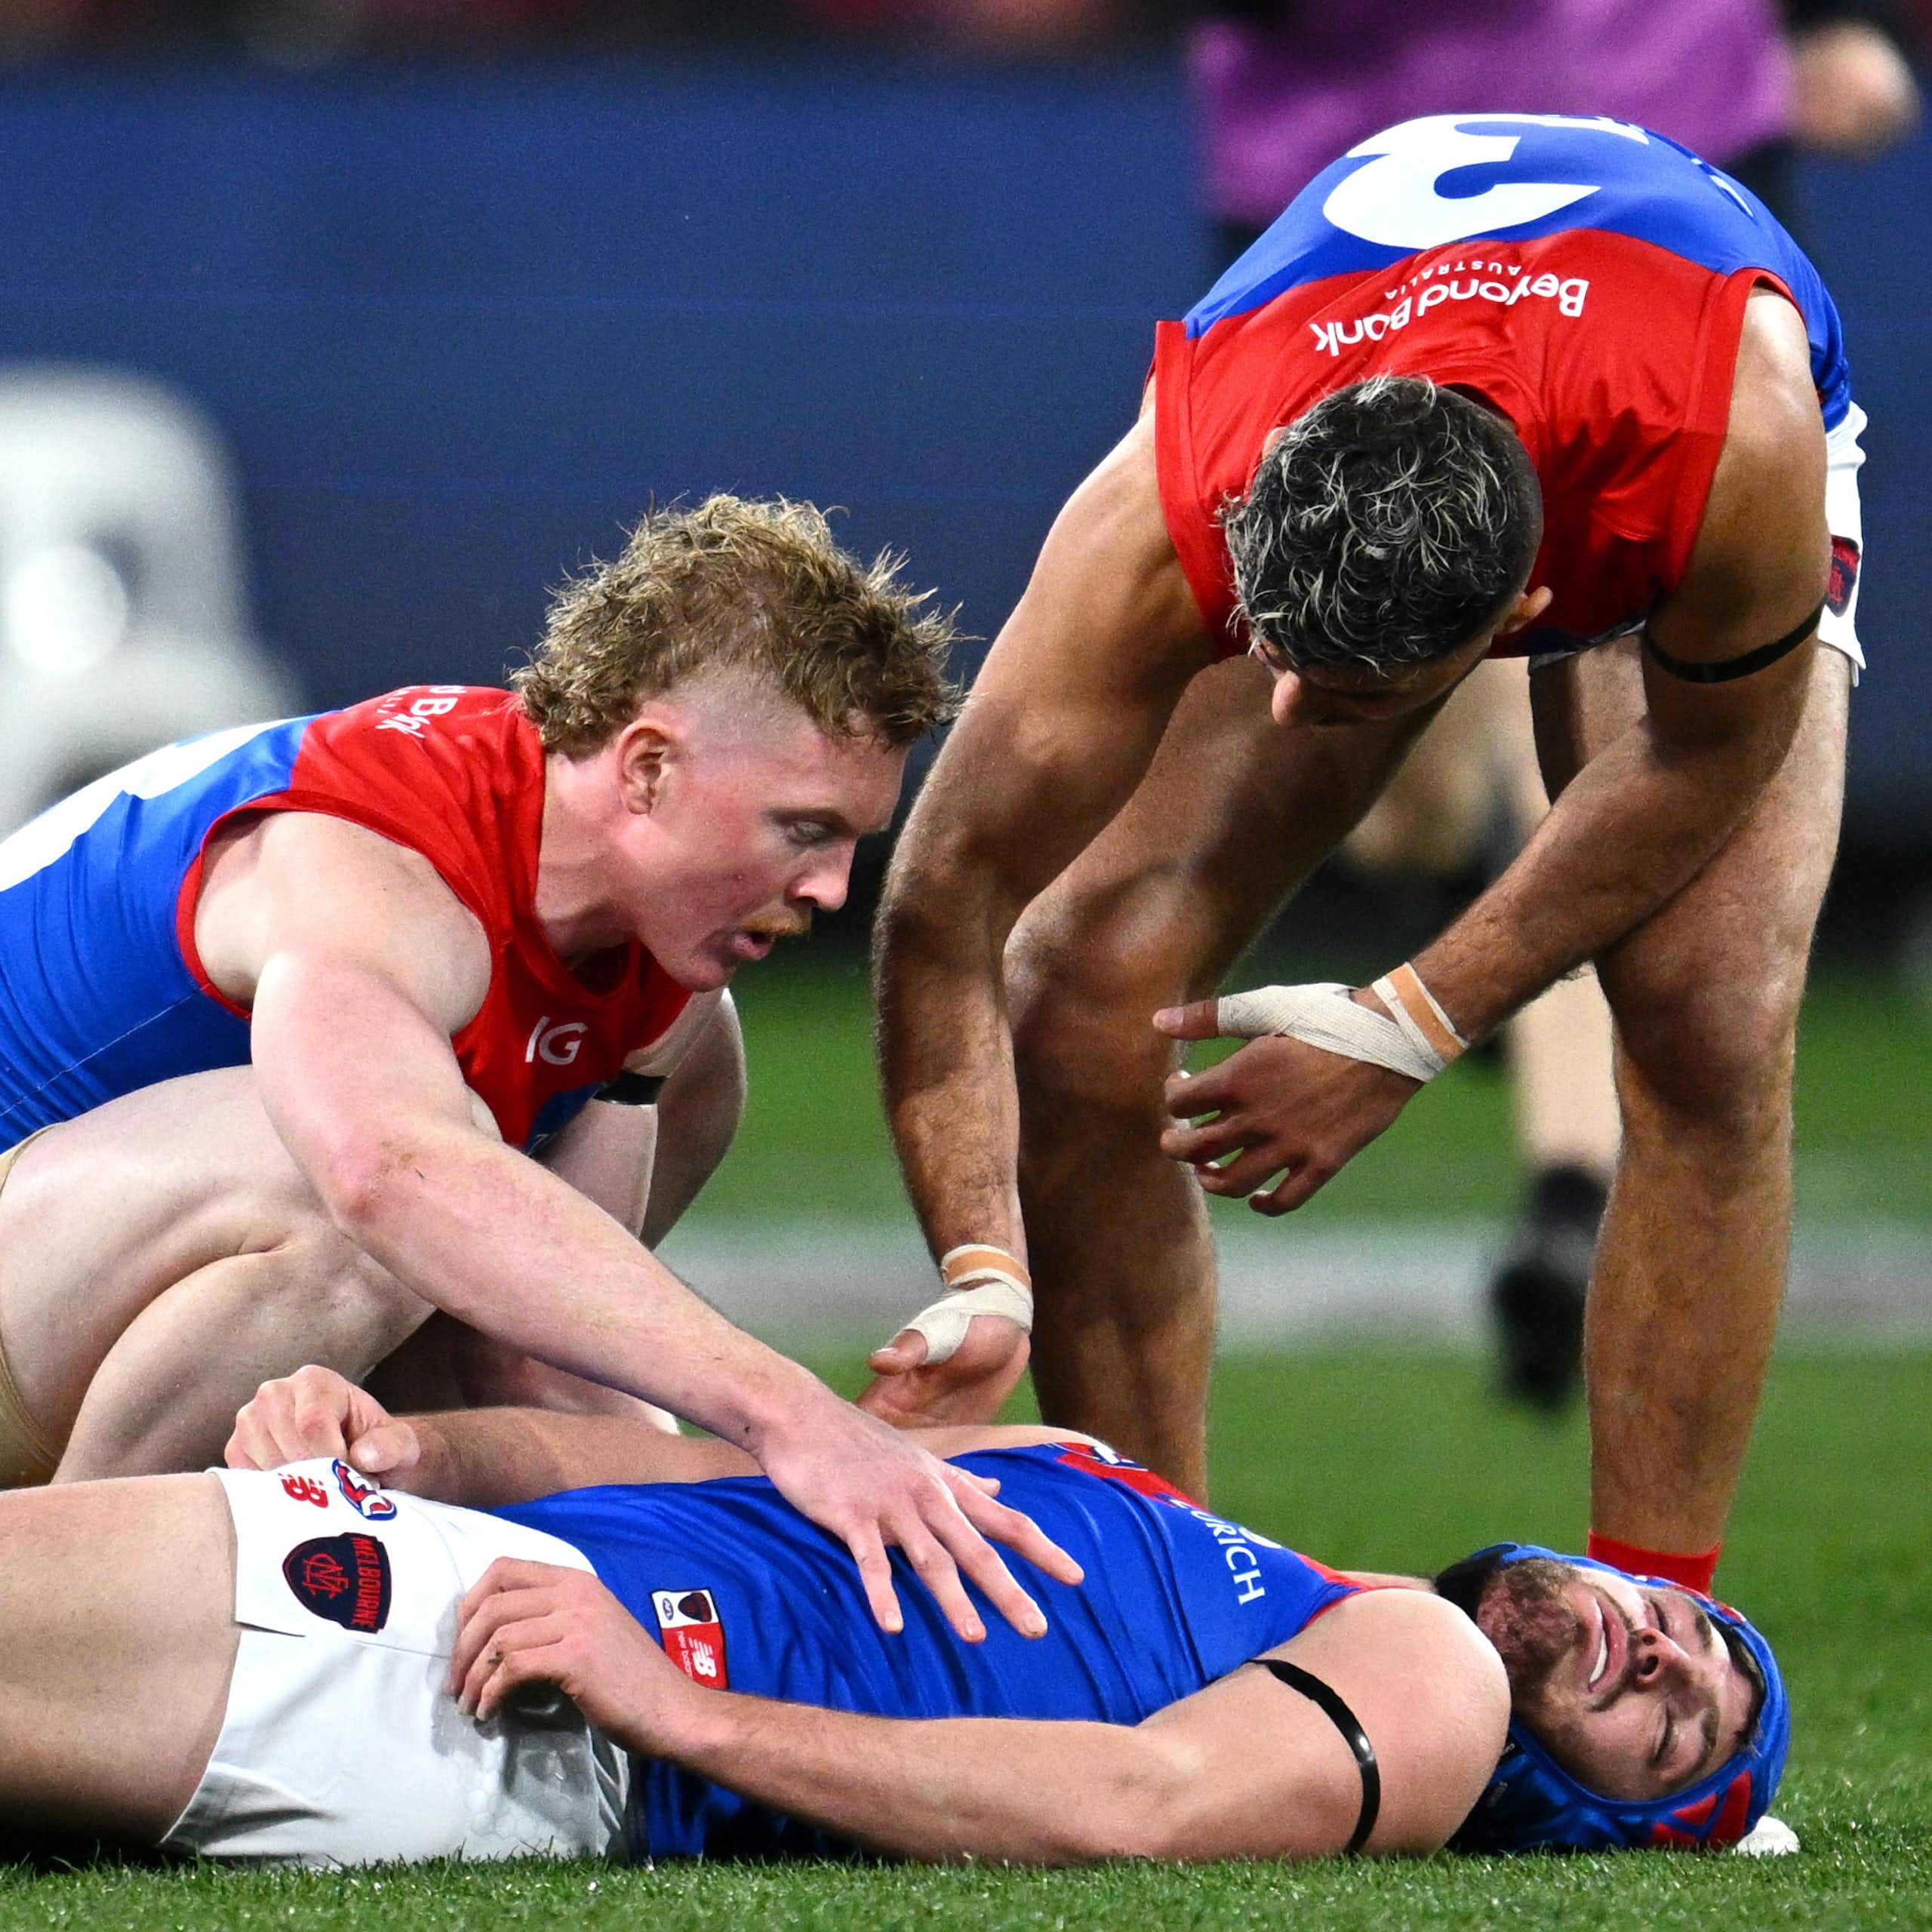 AFL player Angus Brayshaw lays concussed on the ground